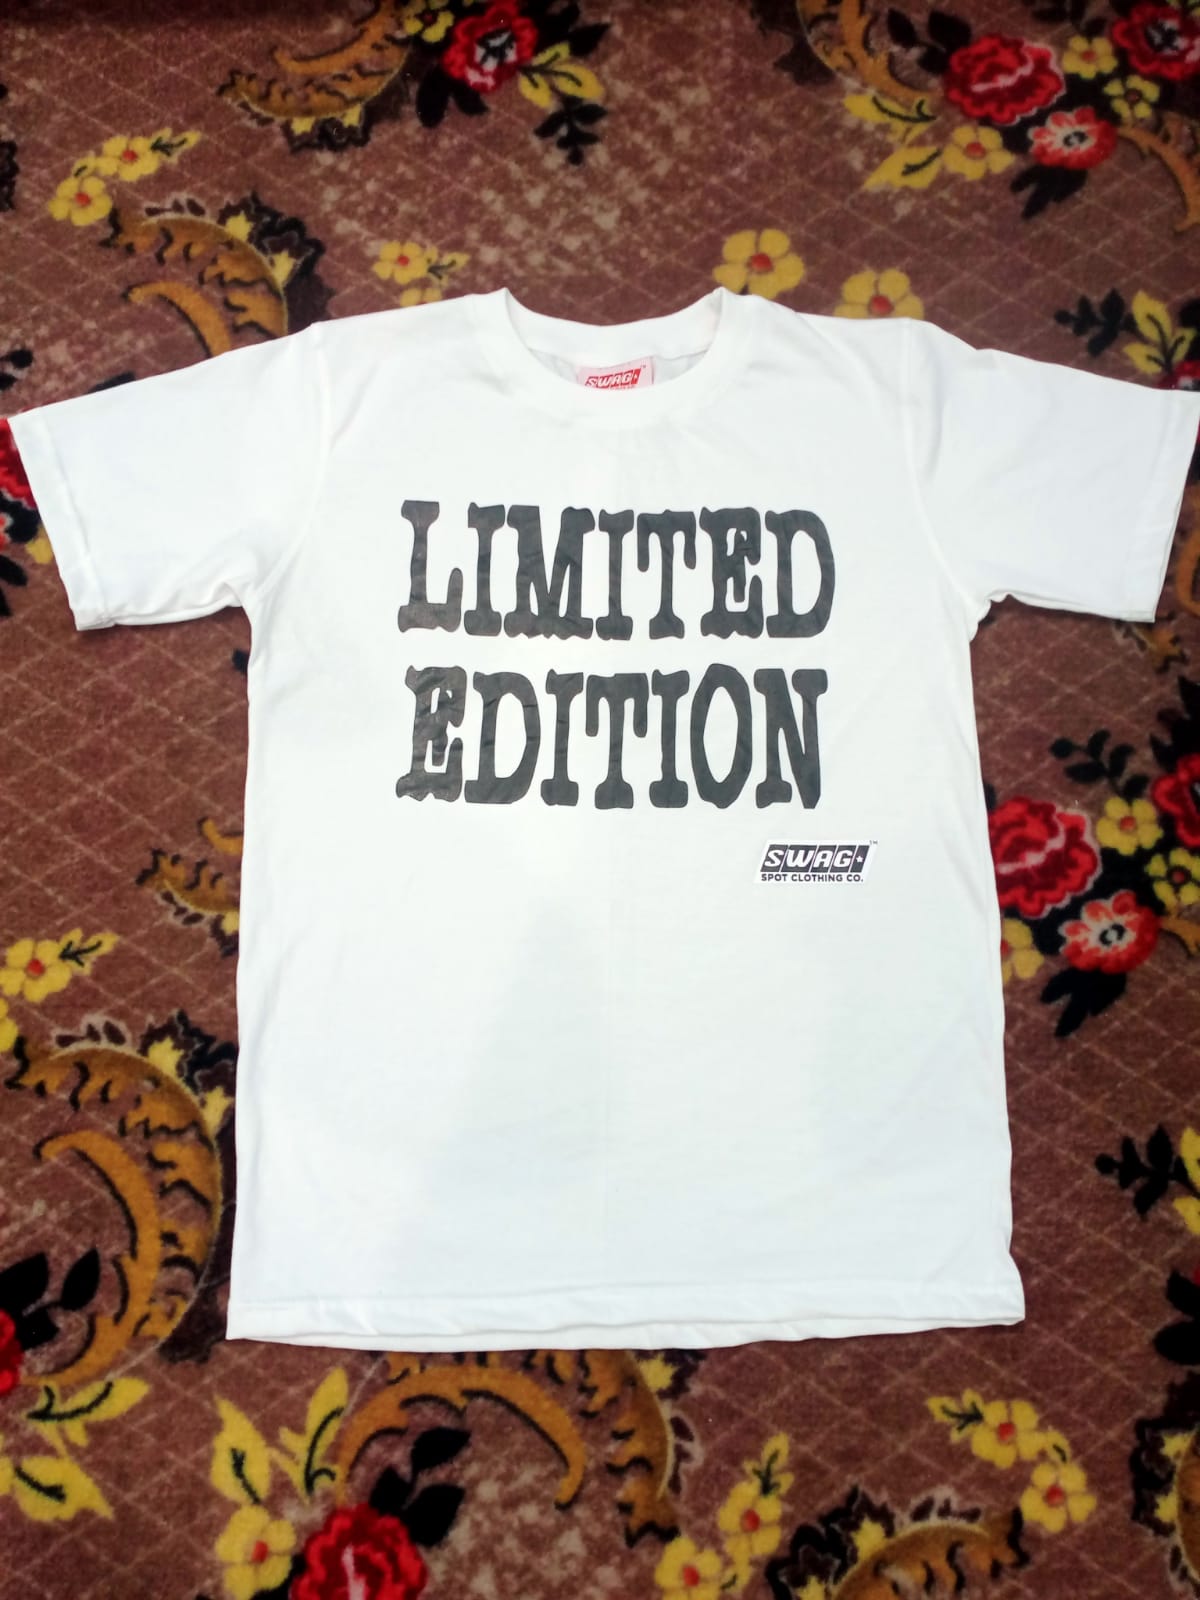 Limited Edition Unisex T-shirt